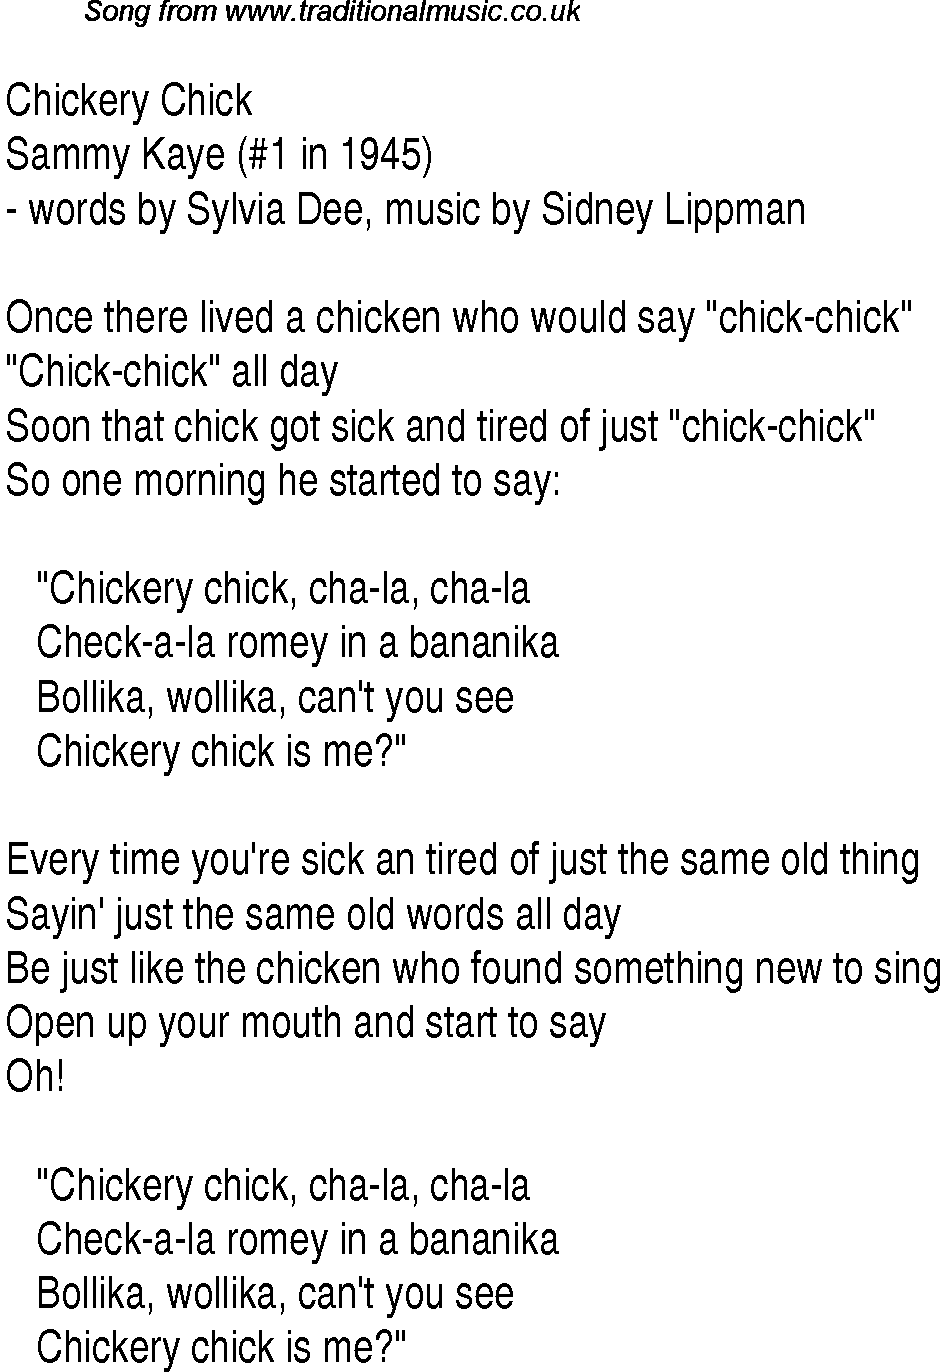 Music charts top songs 1945 - lyrics for Chickery Chick